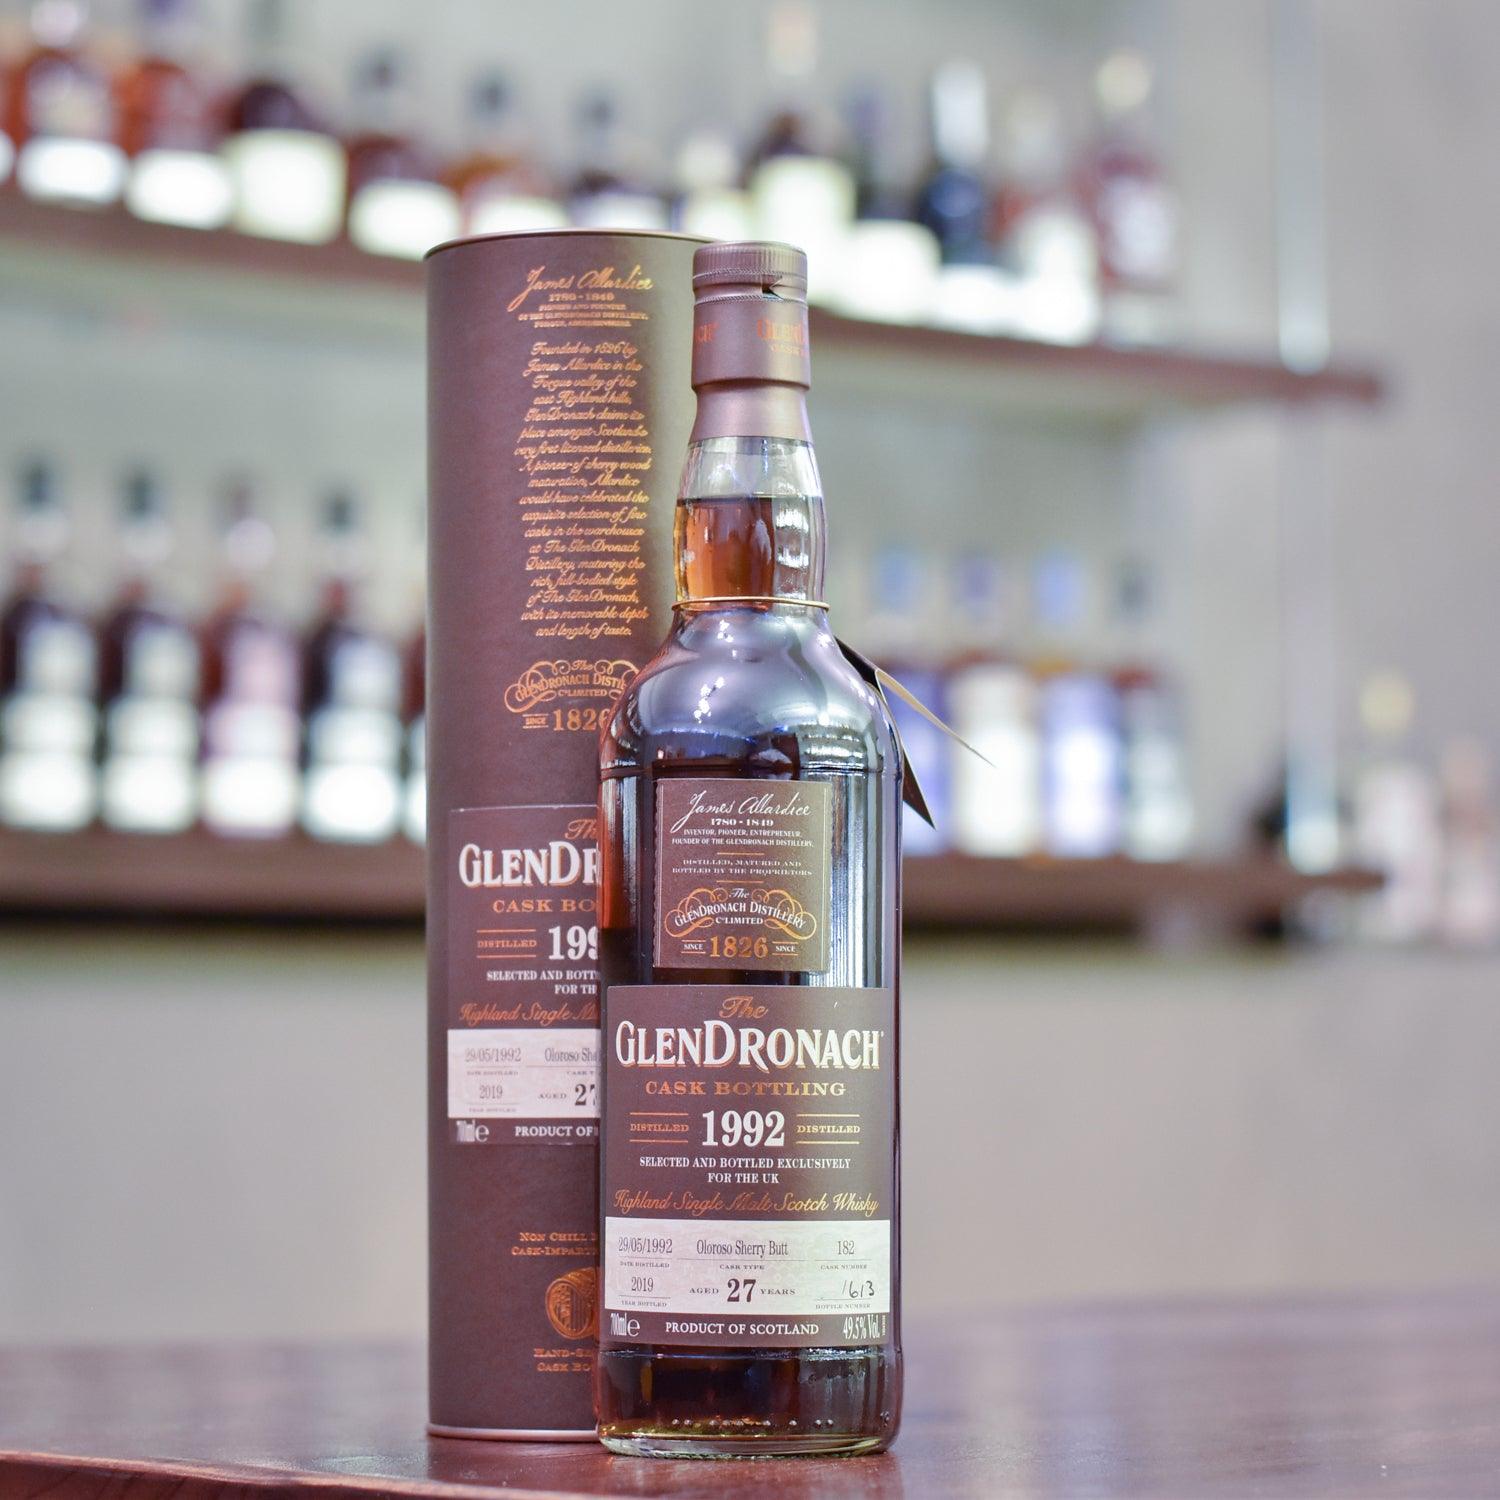 Glendronach 27 Year Old 1992 UK Exclusive Cask 182 - The Rare Malt